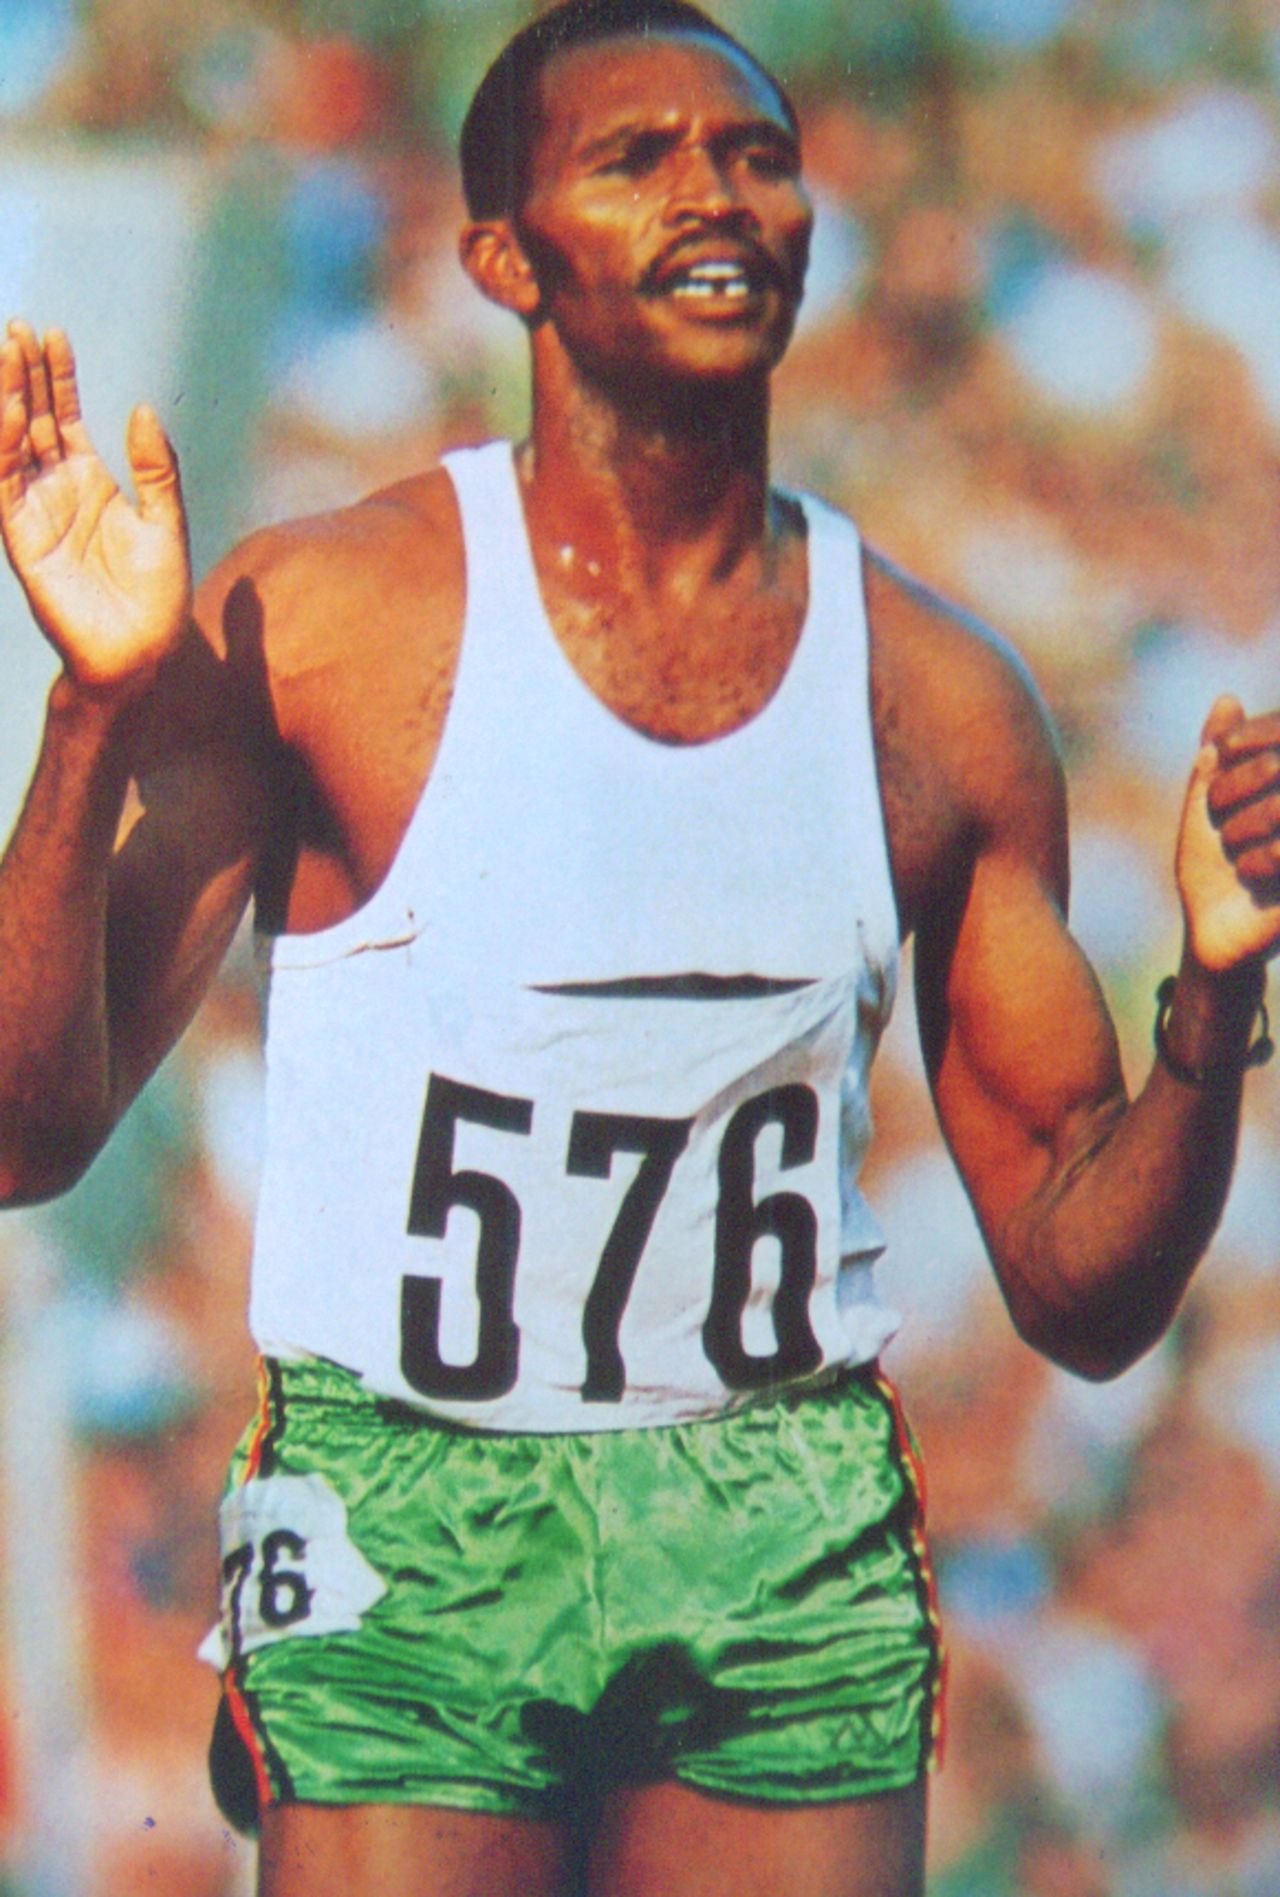 Keino's success led to him becoming a Kenyan national hero as well as a figure admired across the African continent.